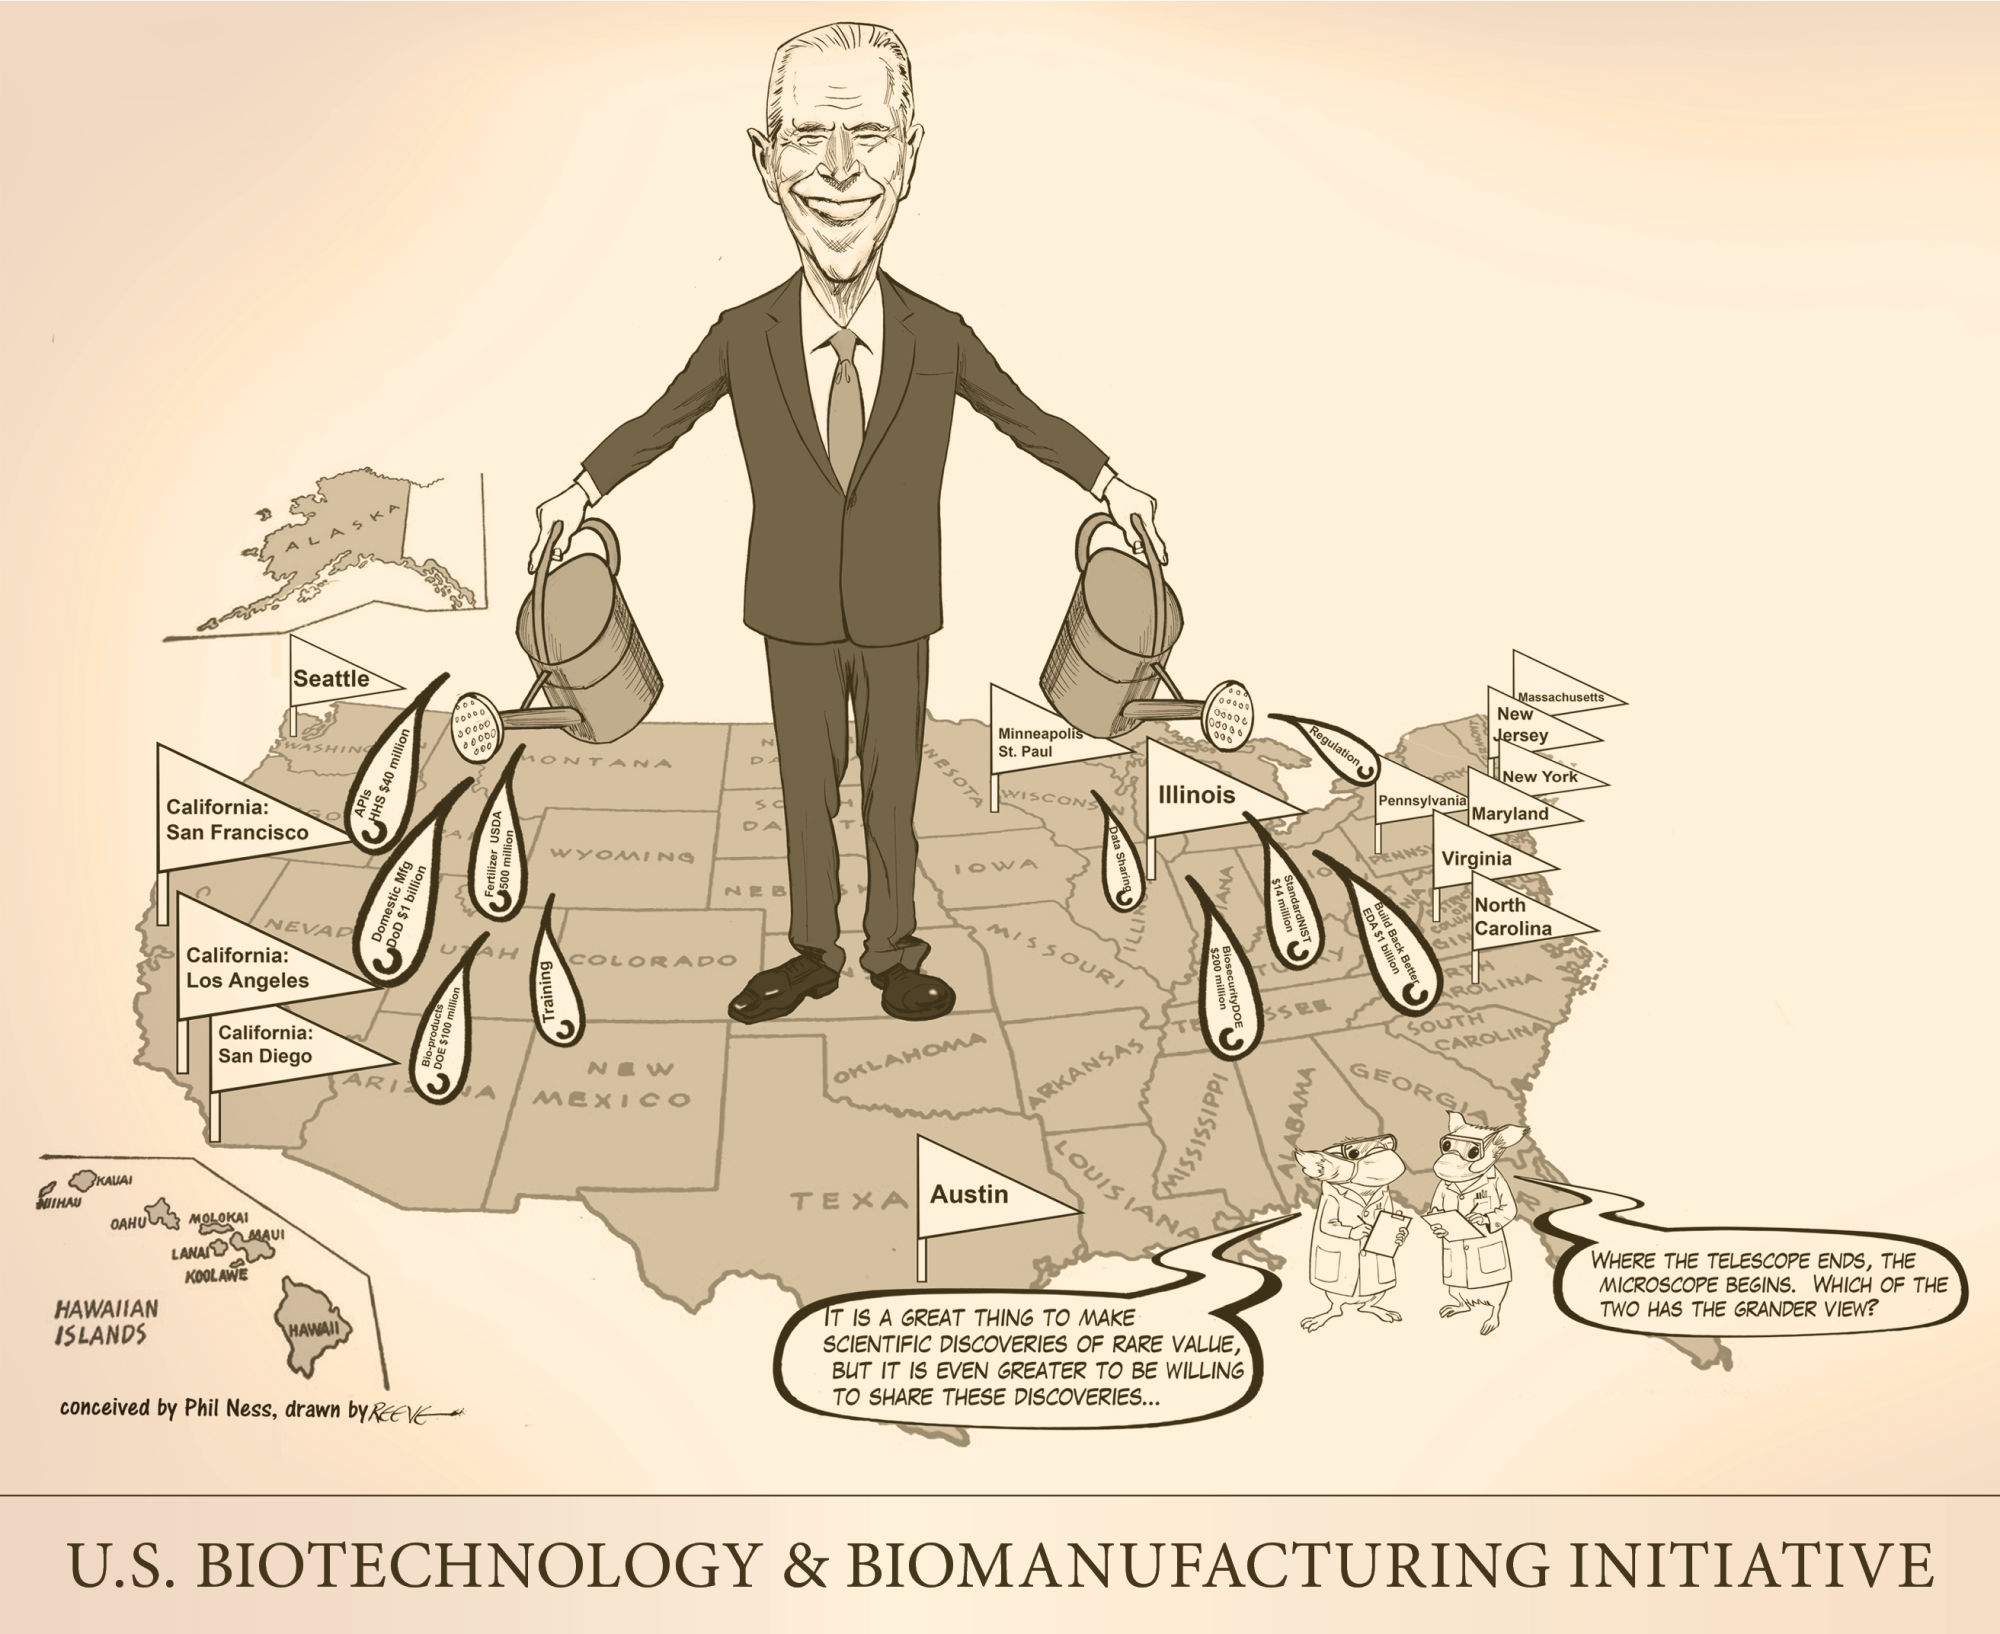 Cartoon: U.S. Biotechnology & Biomanufacturing Initiative, Conceived by Phil Ness, drawn by Reeve, 2022.